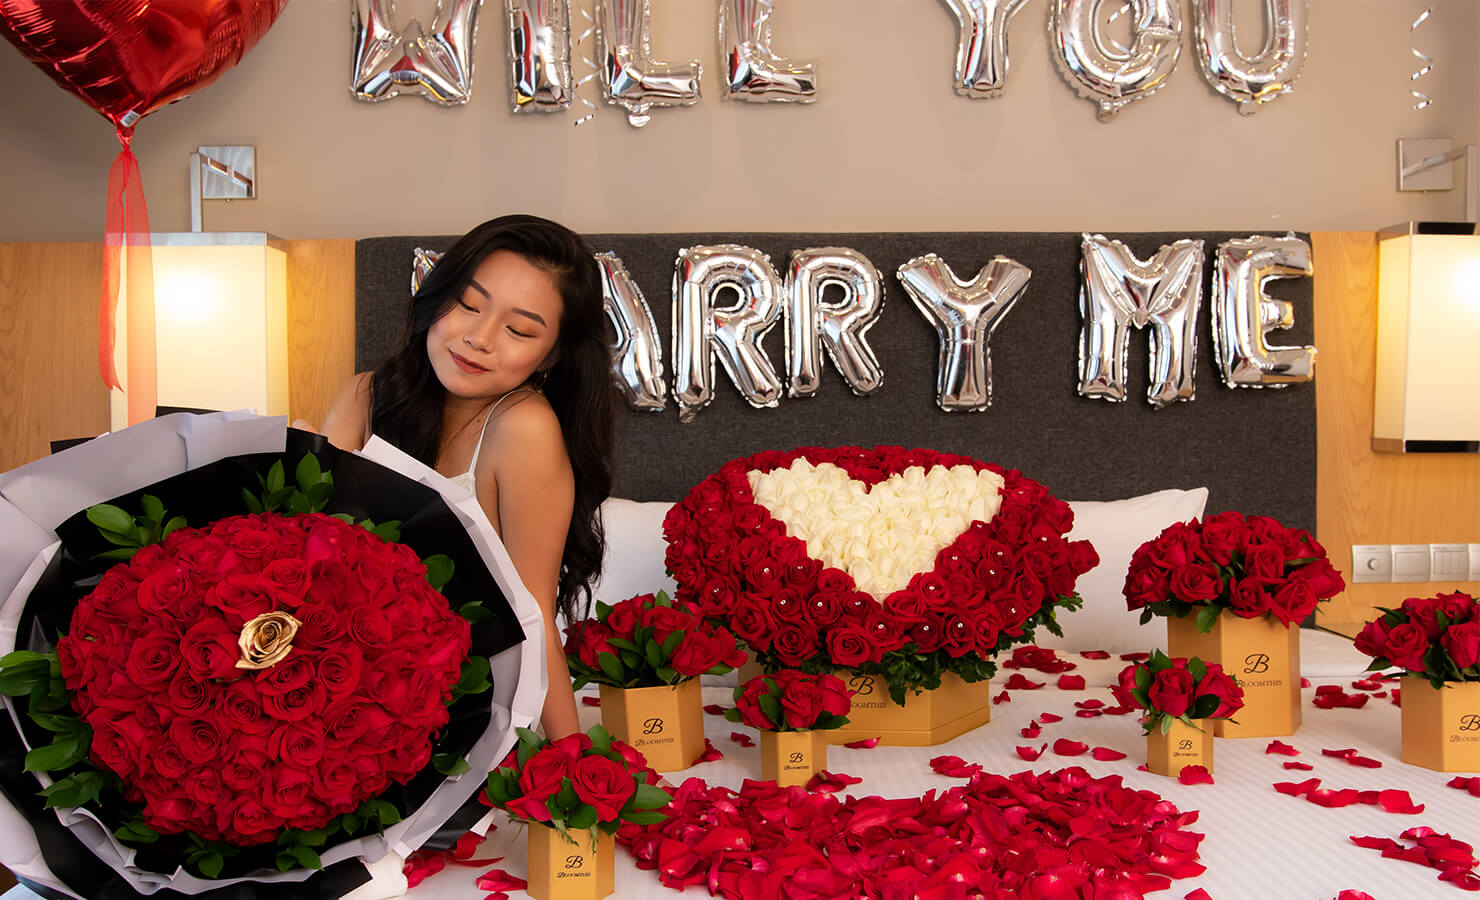 You'll want to get engaged with these luxurious proposal packages!